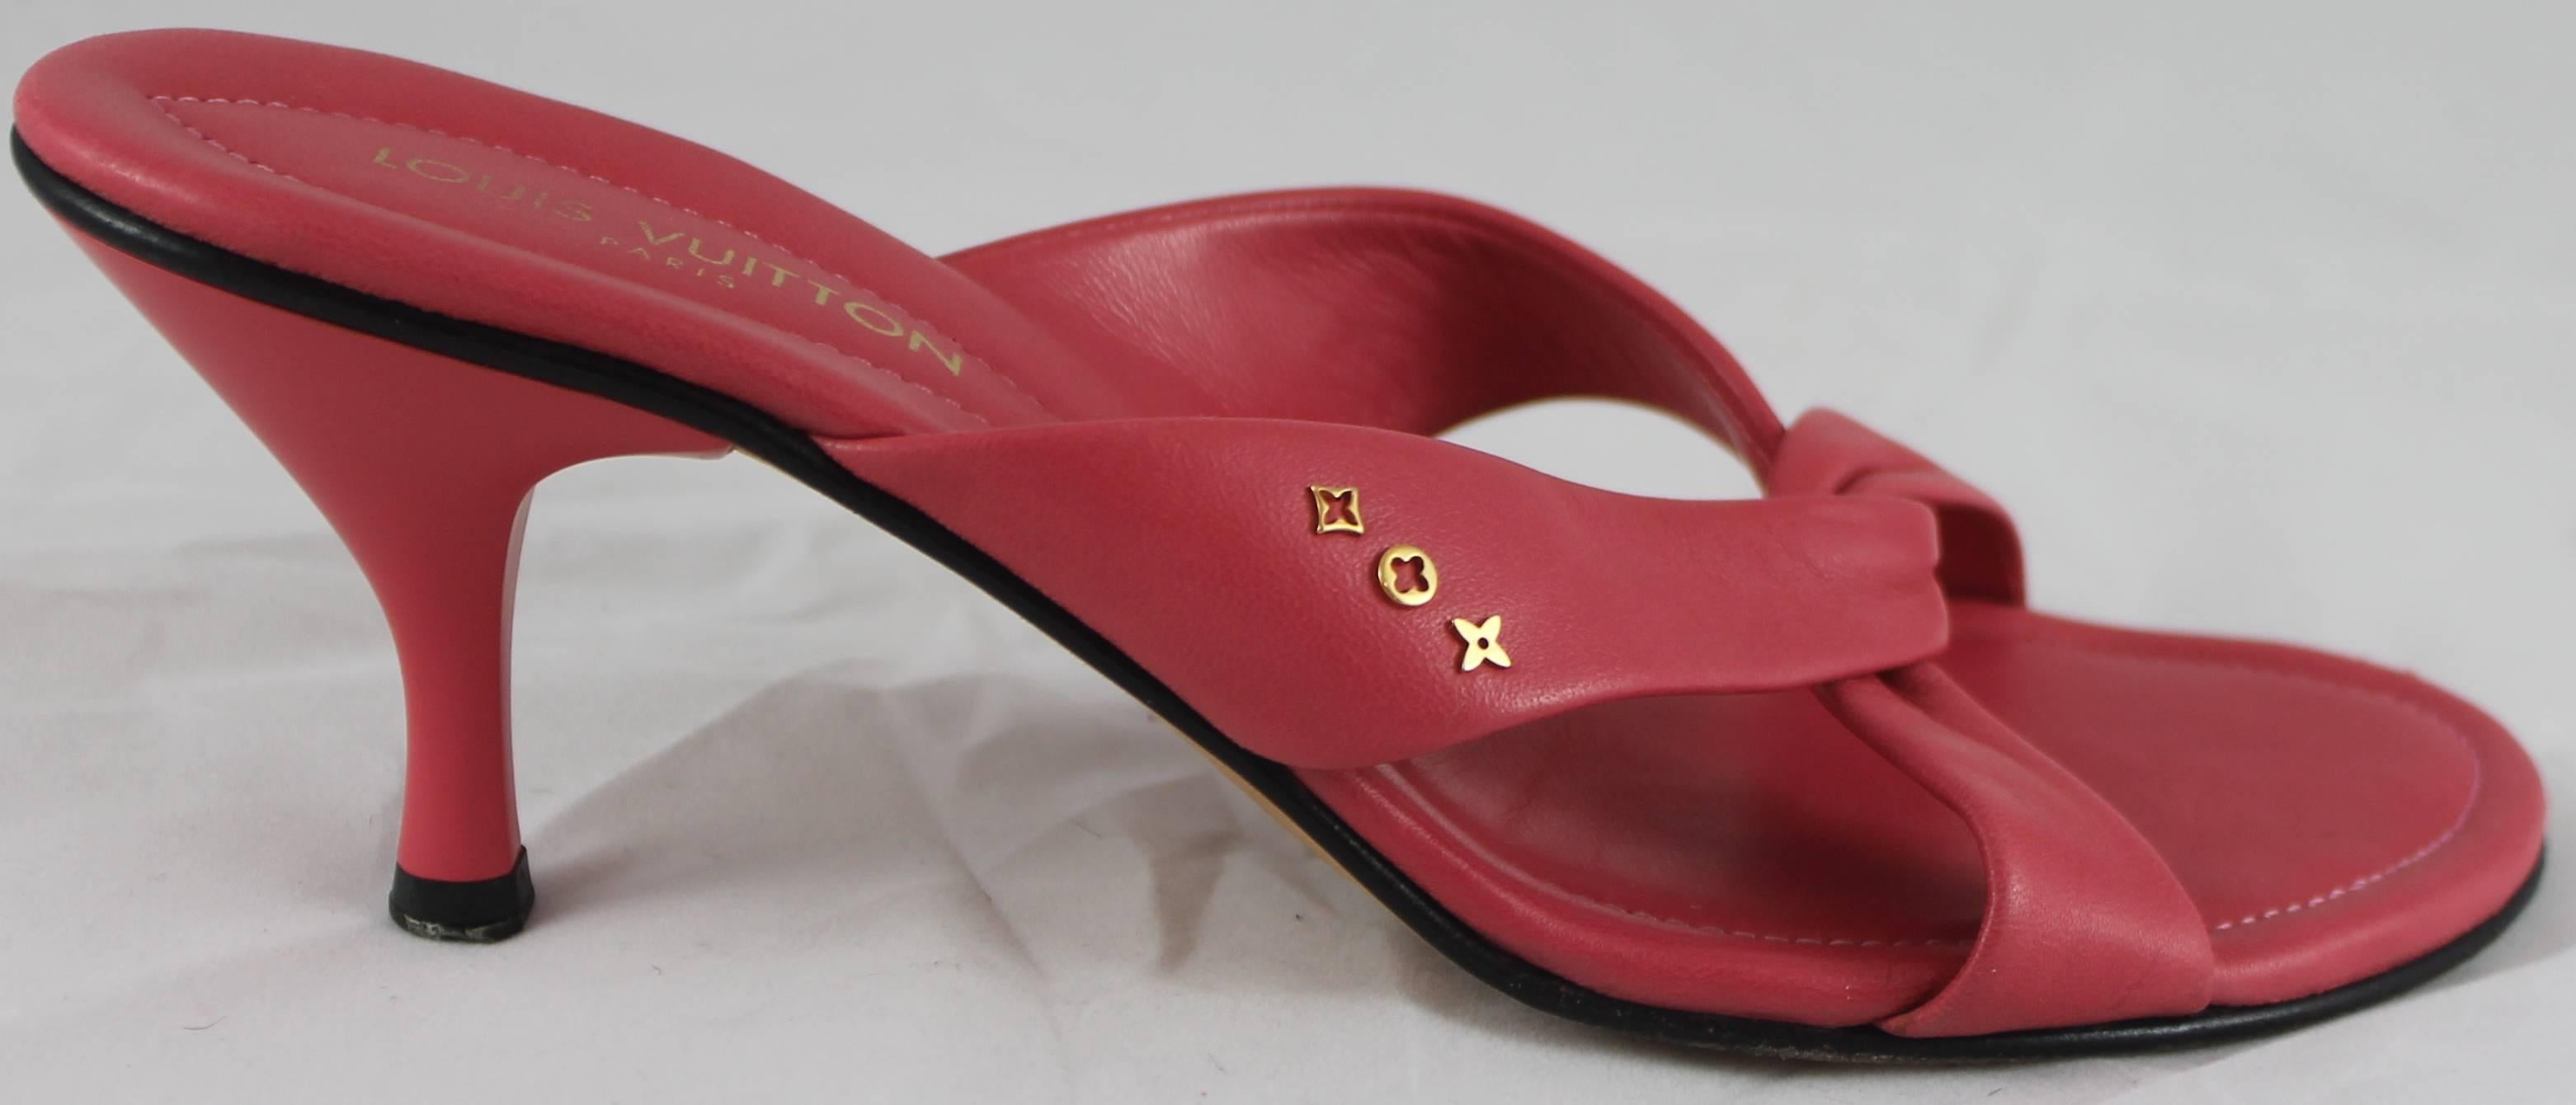 Louis Vuitton Coral Criss-Cross Leather Sandals with Heel and Gold Details - 37. These coral sandal heels have two strips of leather that are criss-crossed and there are some Louis Vuitton emblem gold metal details on the sides. These shoes are in